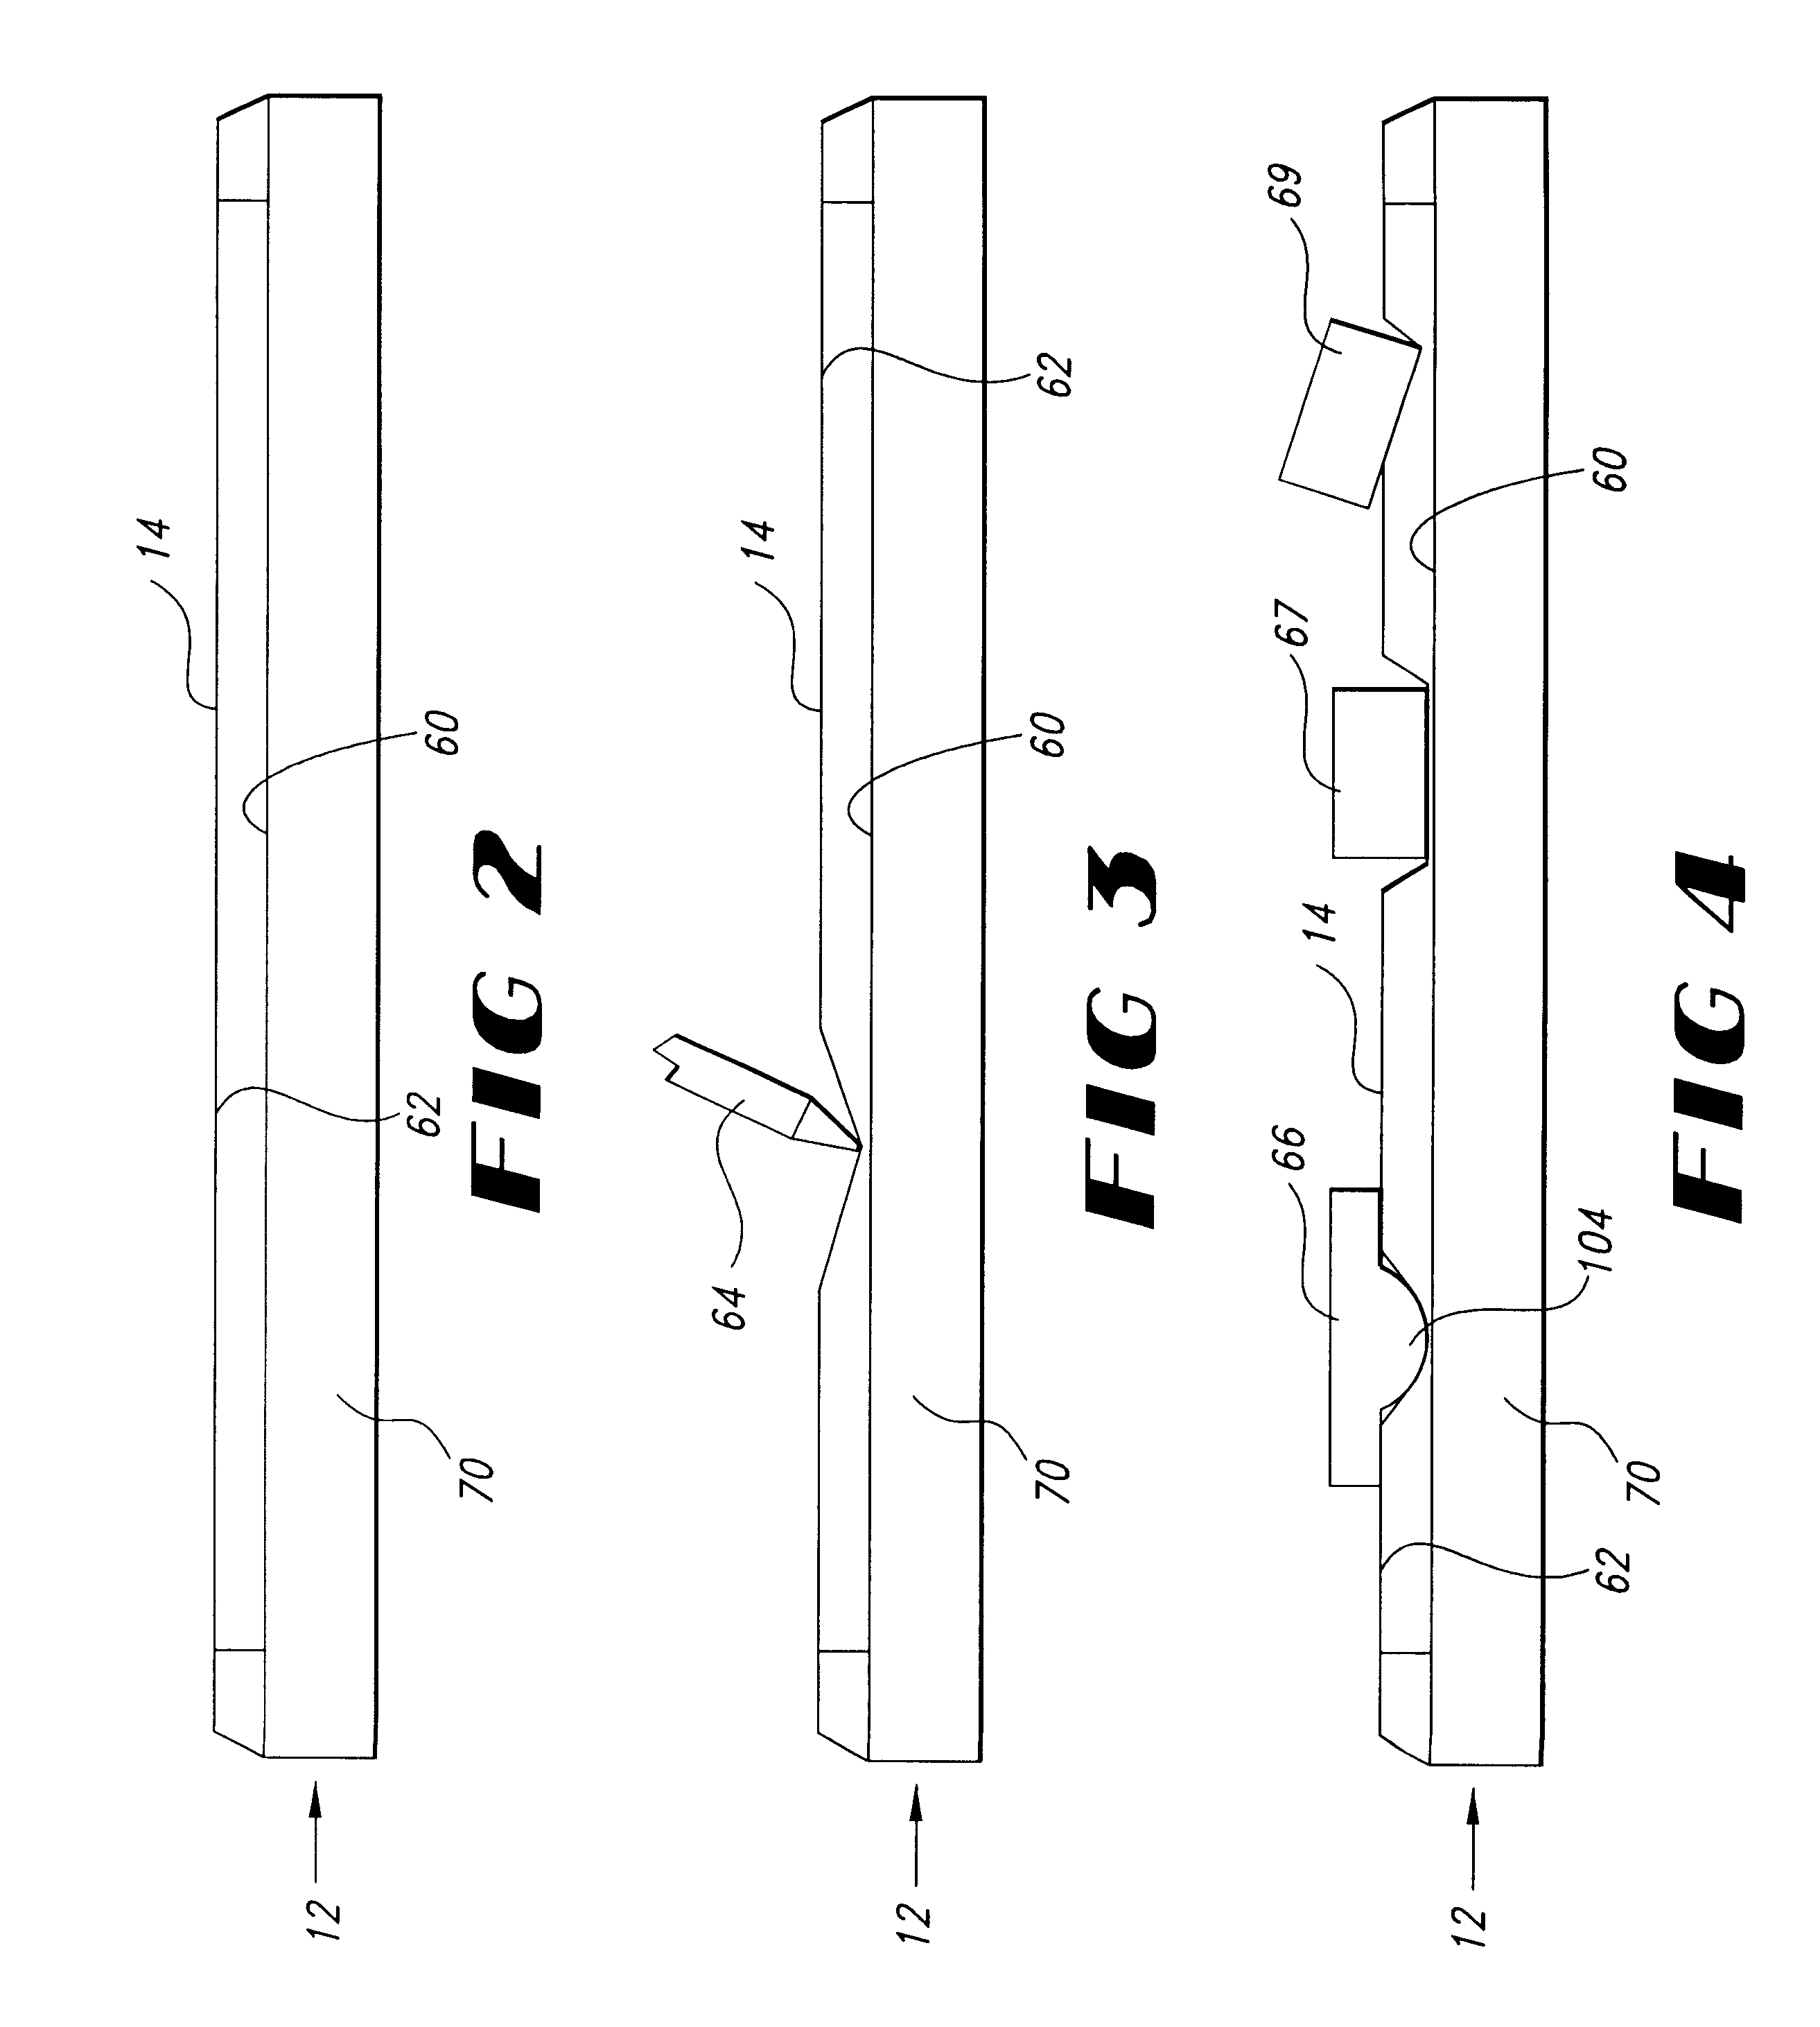 Electronic whiteboard system and method